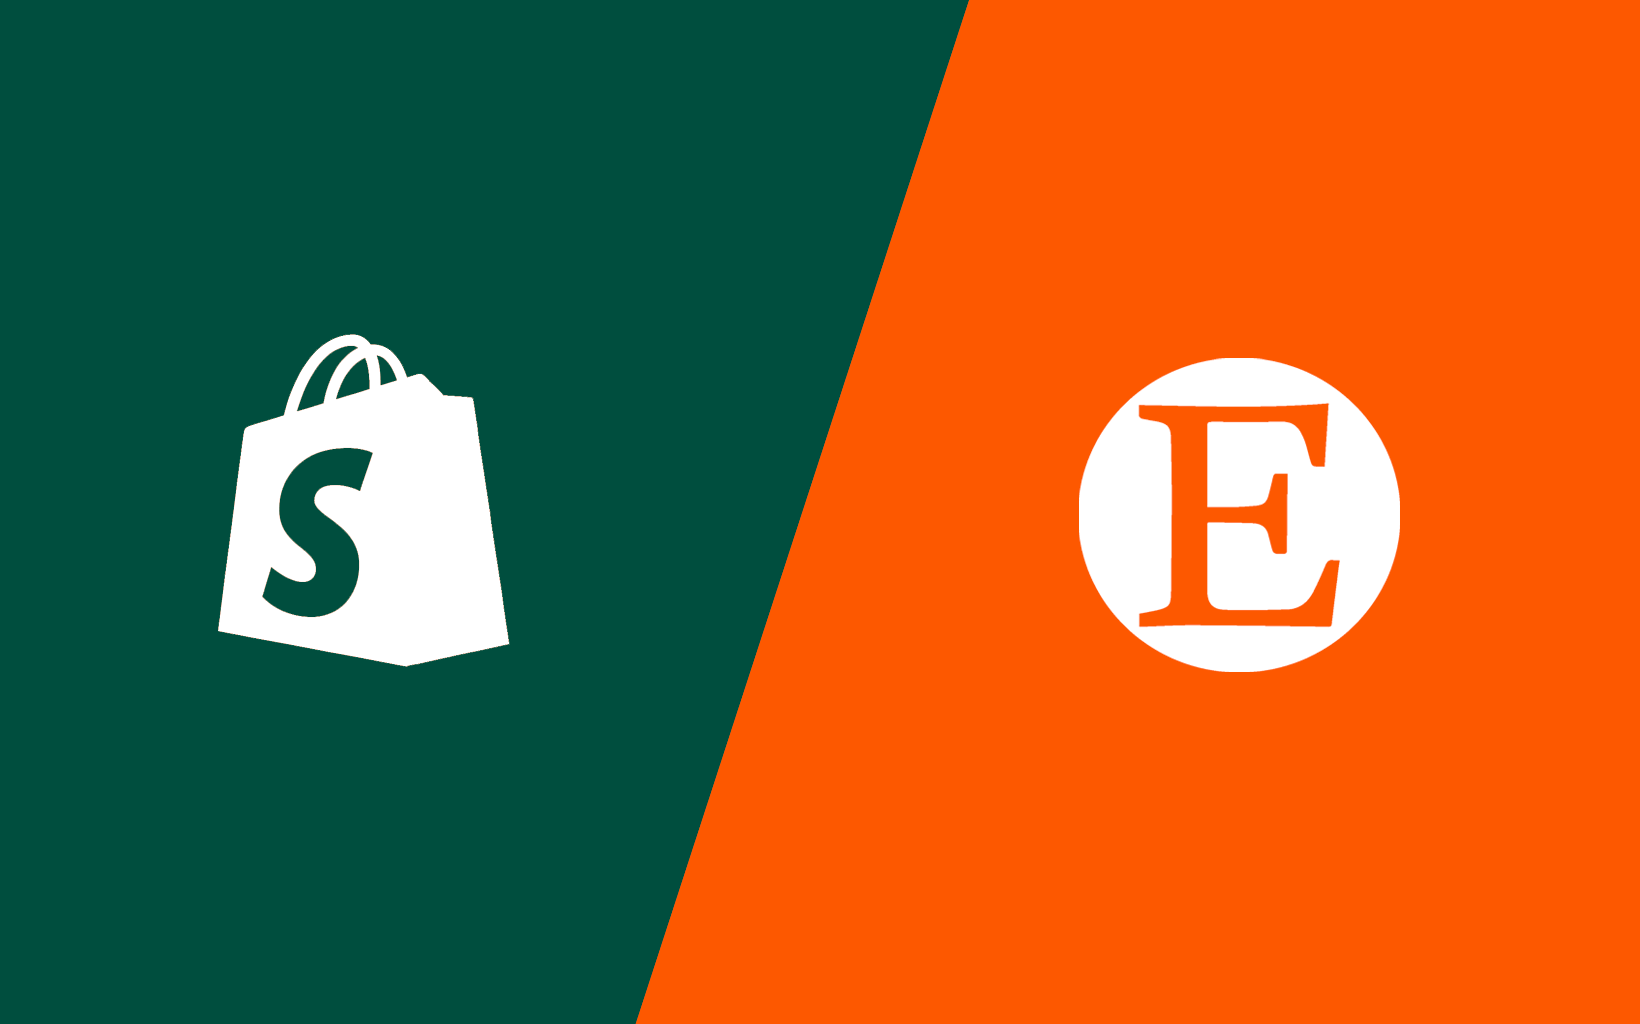 Shopify vs Etsy: Which platform is best for online sellers?